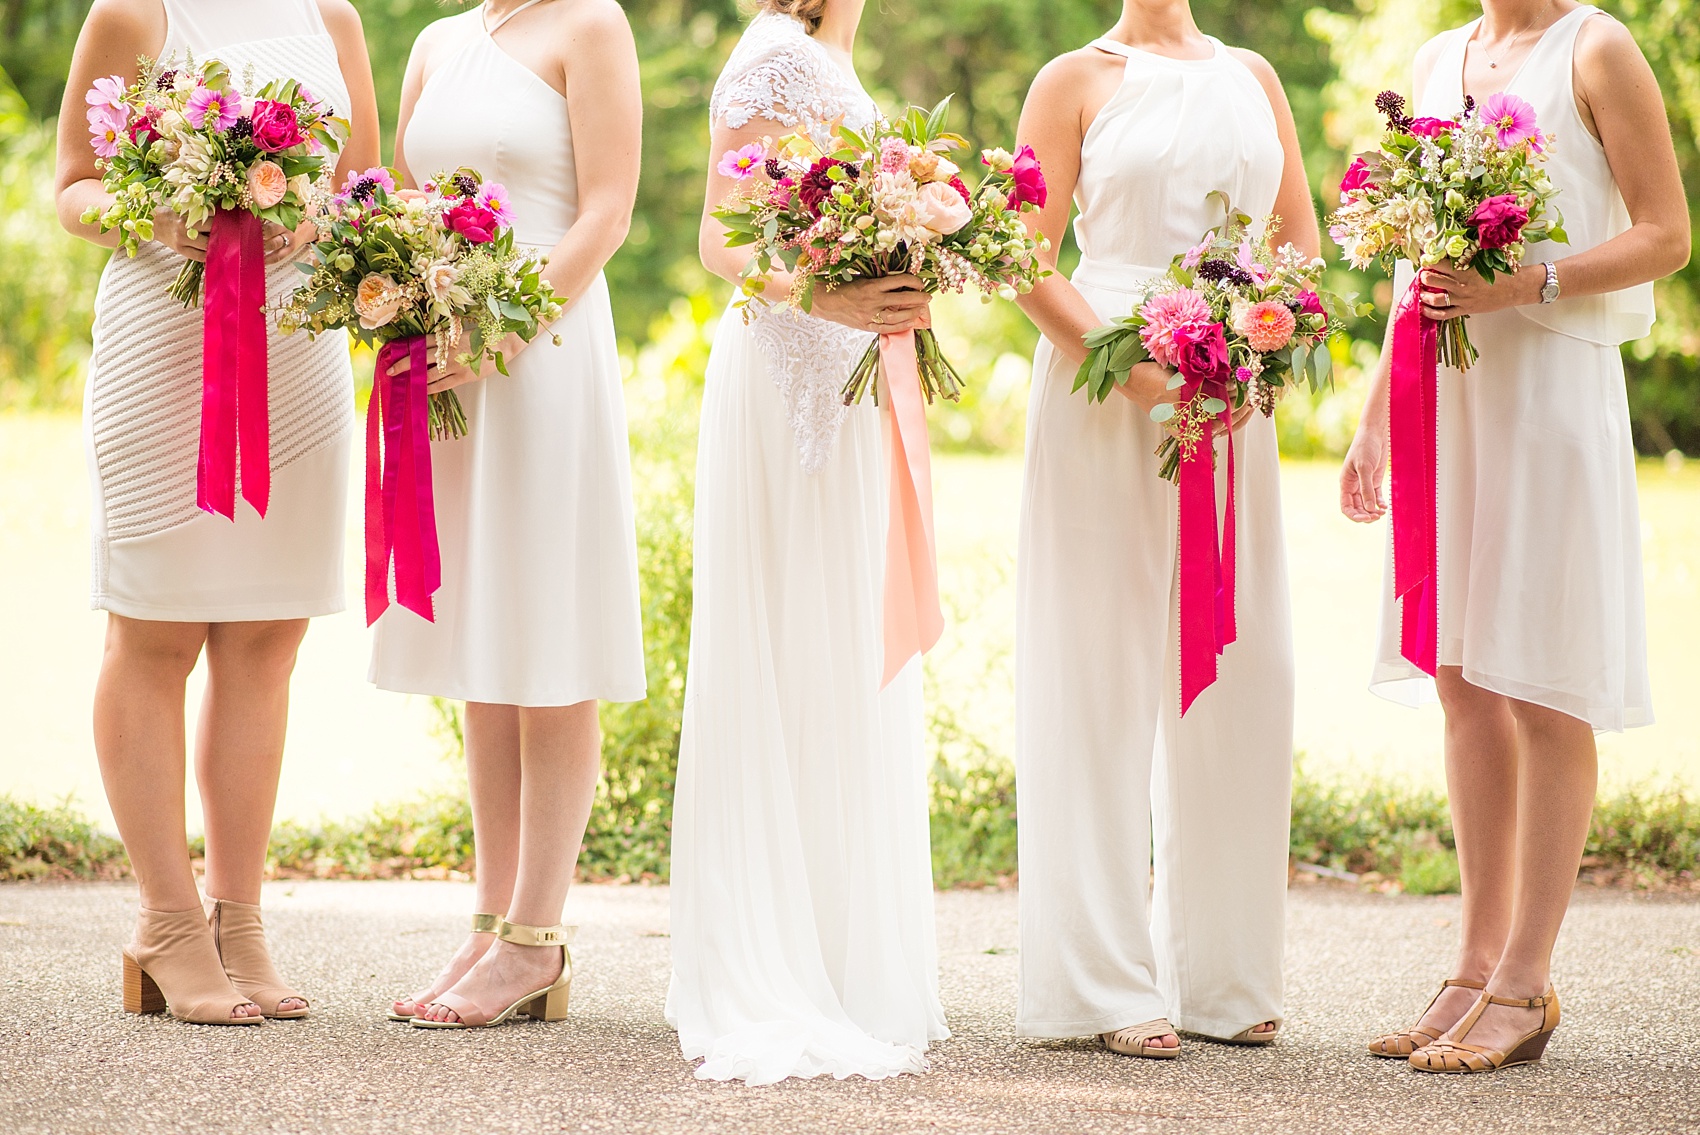 Mikkel Paige Photography photos of an all-white dressed bridal party with pink floral accents for a wedding at Prospect Park Boathouse in Brooklyn, NY. Flowers by Sachi Rose and bride's gown by Reem Acra.